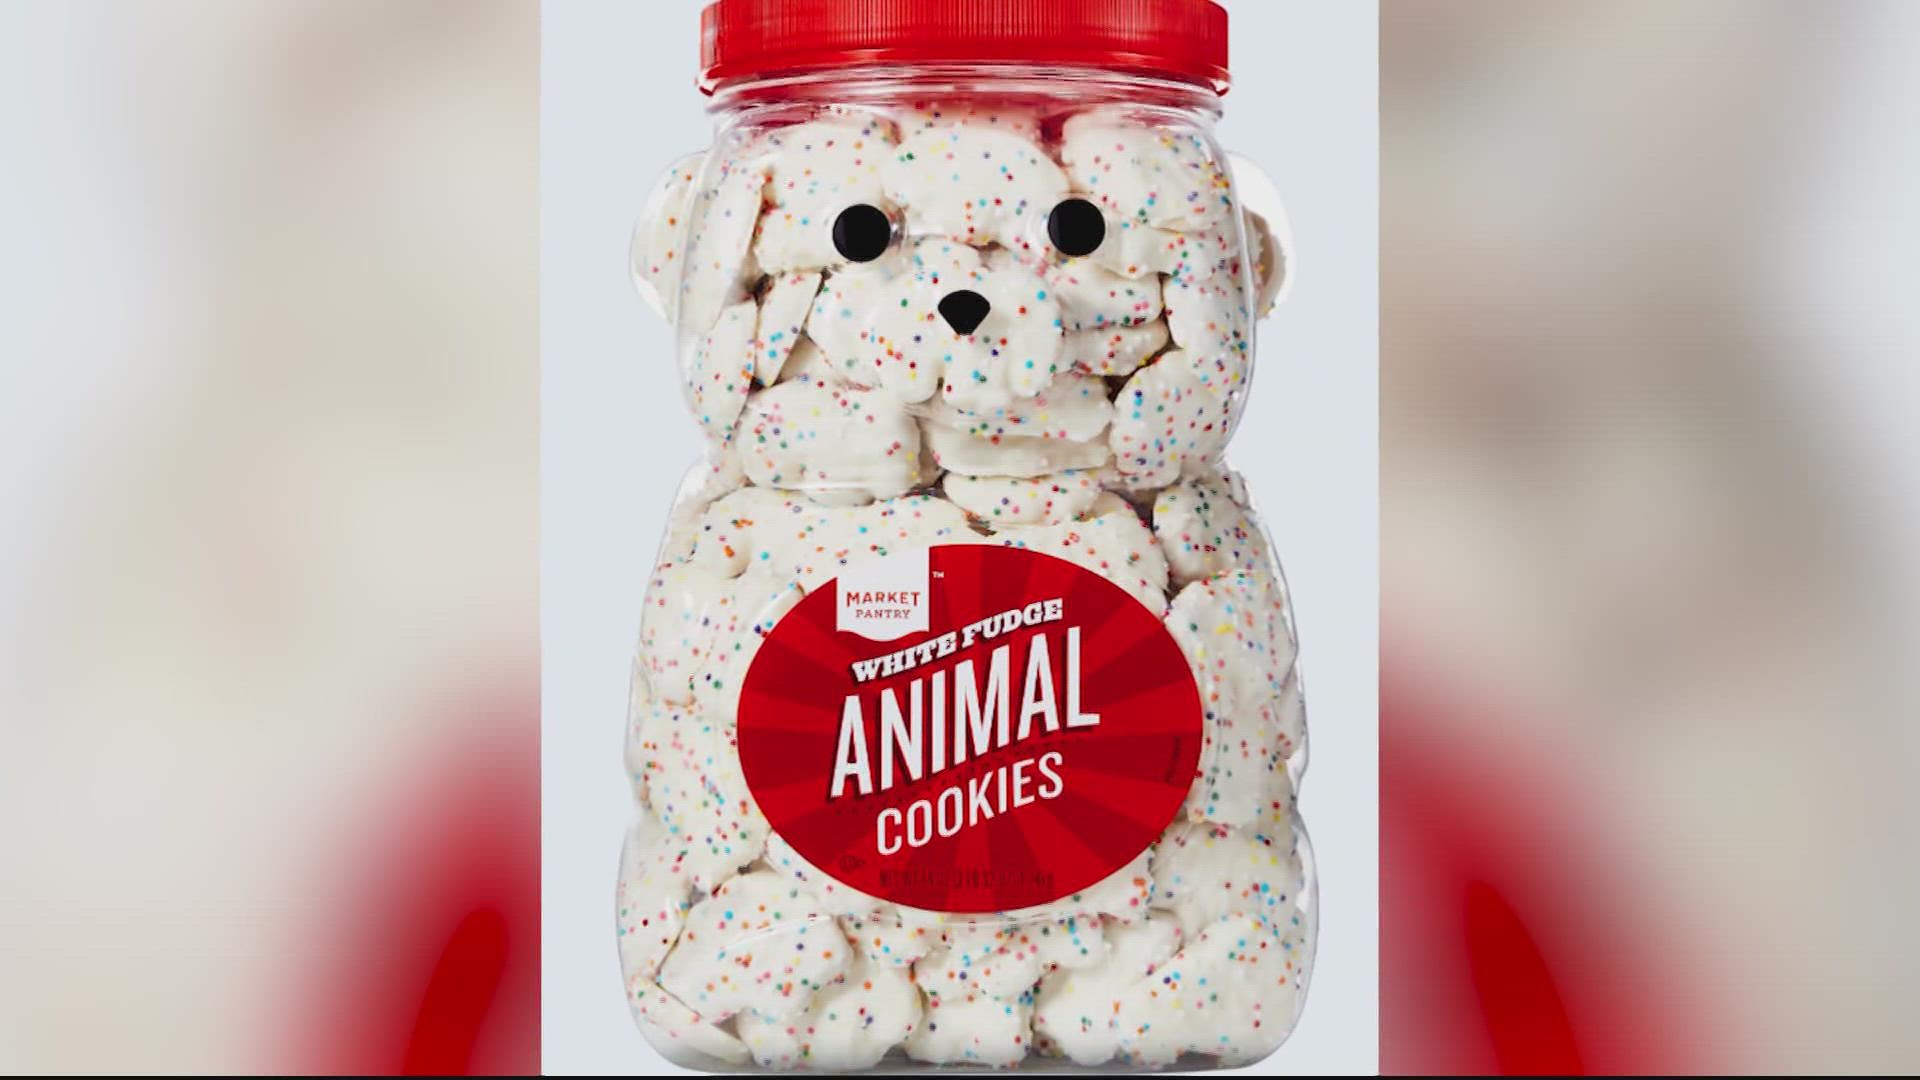 The animal cookies were sold at Target stores nationwide under the brand Market Pantry, and comes in a clear plastic jug formed to a bear shape.